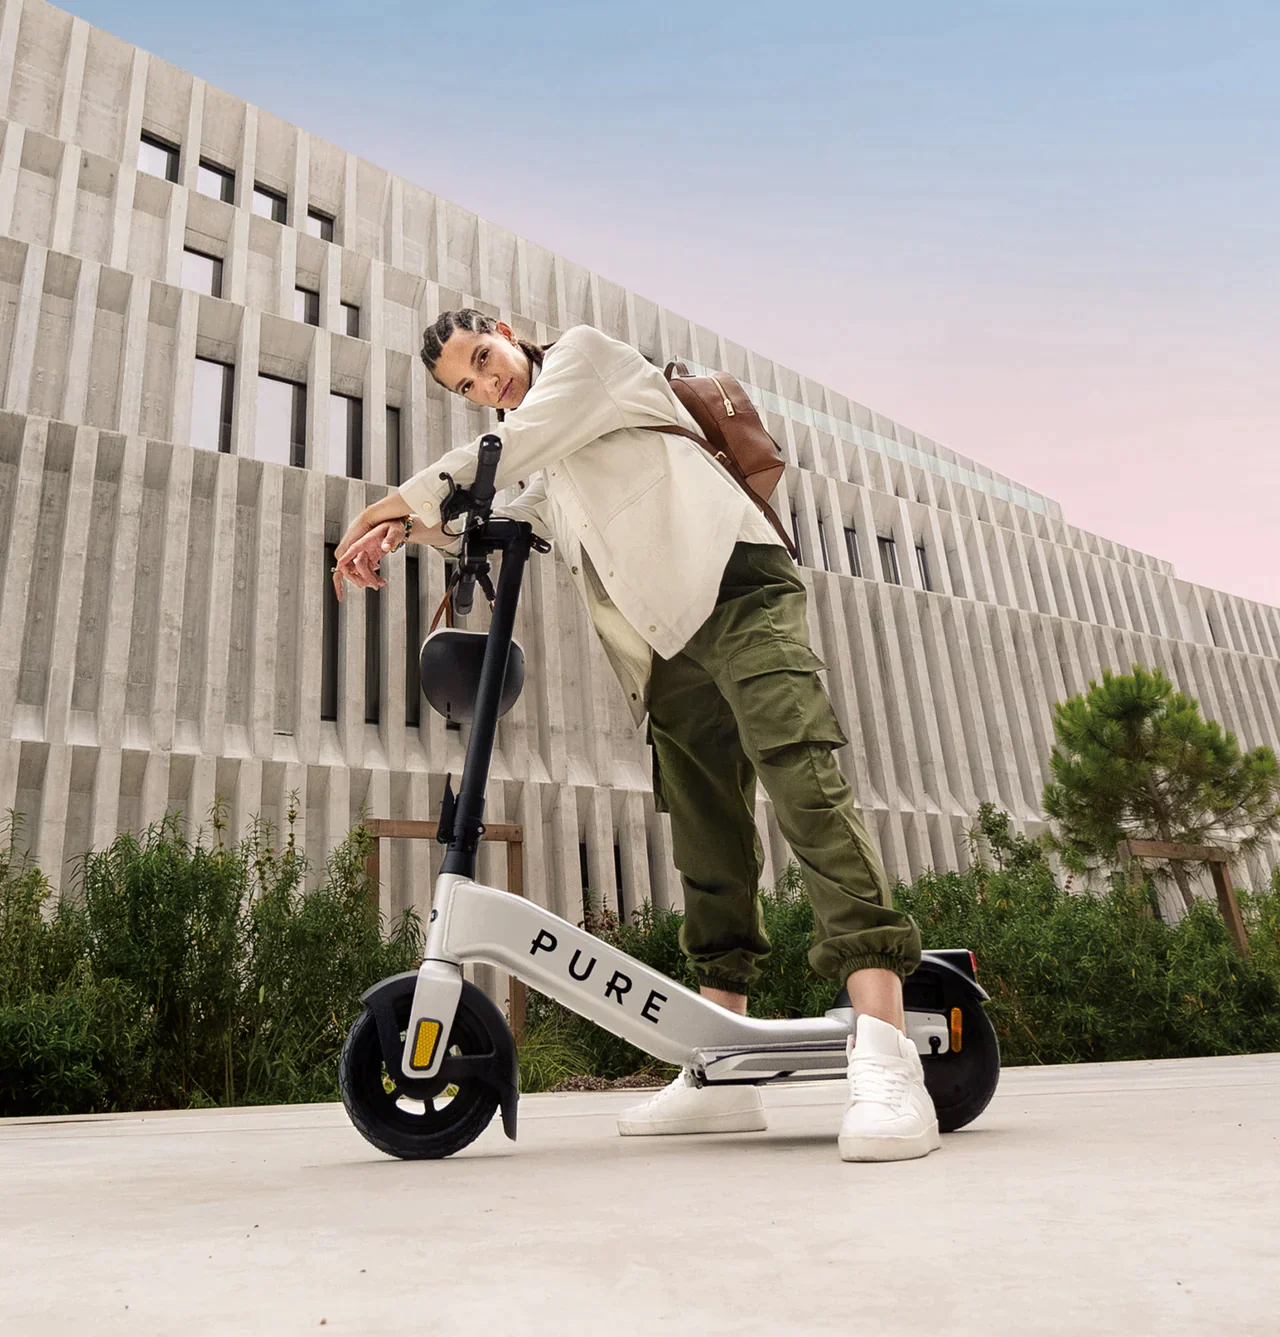 Pure Electric’s Ultra-Compact E-Scooter Packs A 710W Motor And A Stunning 24+ Mile Range